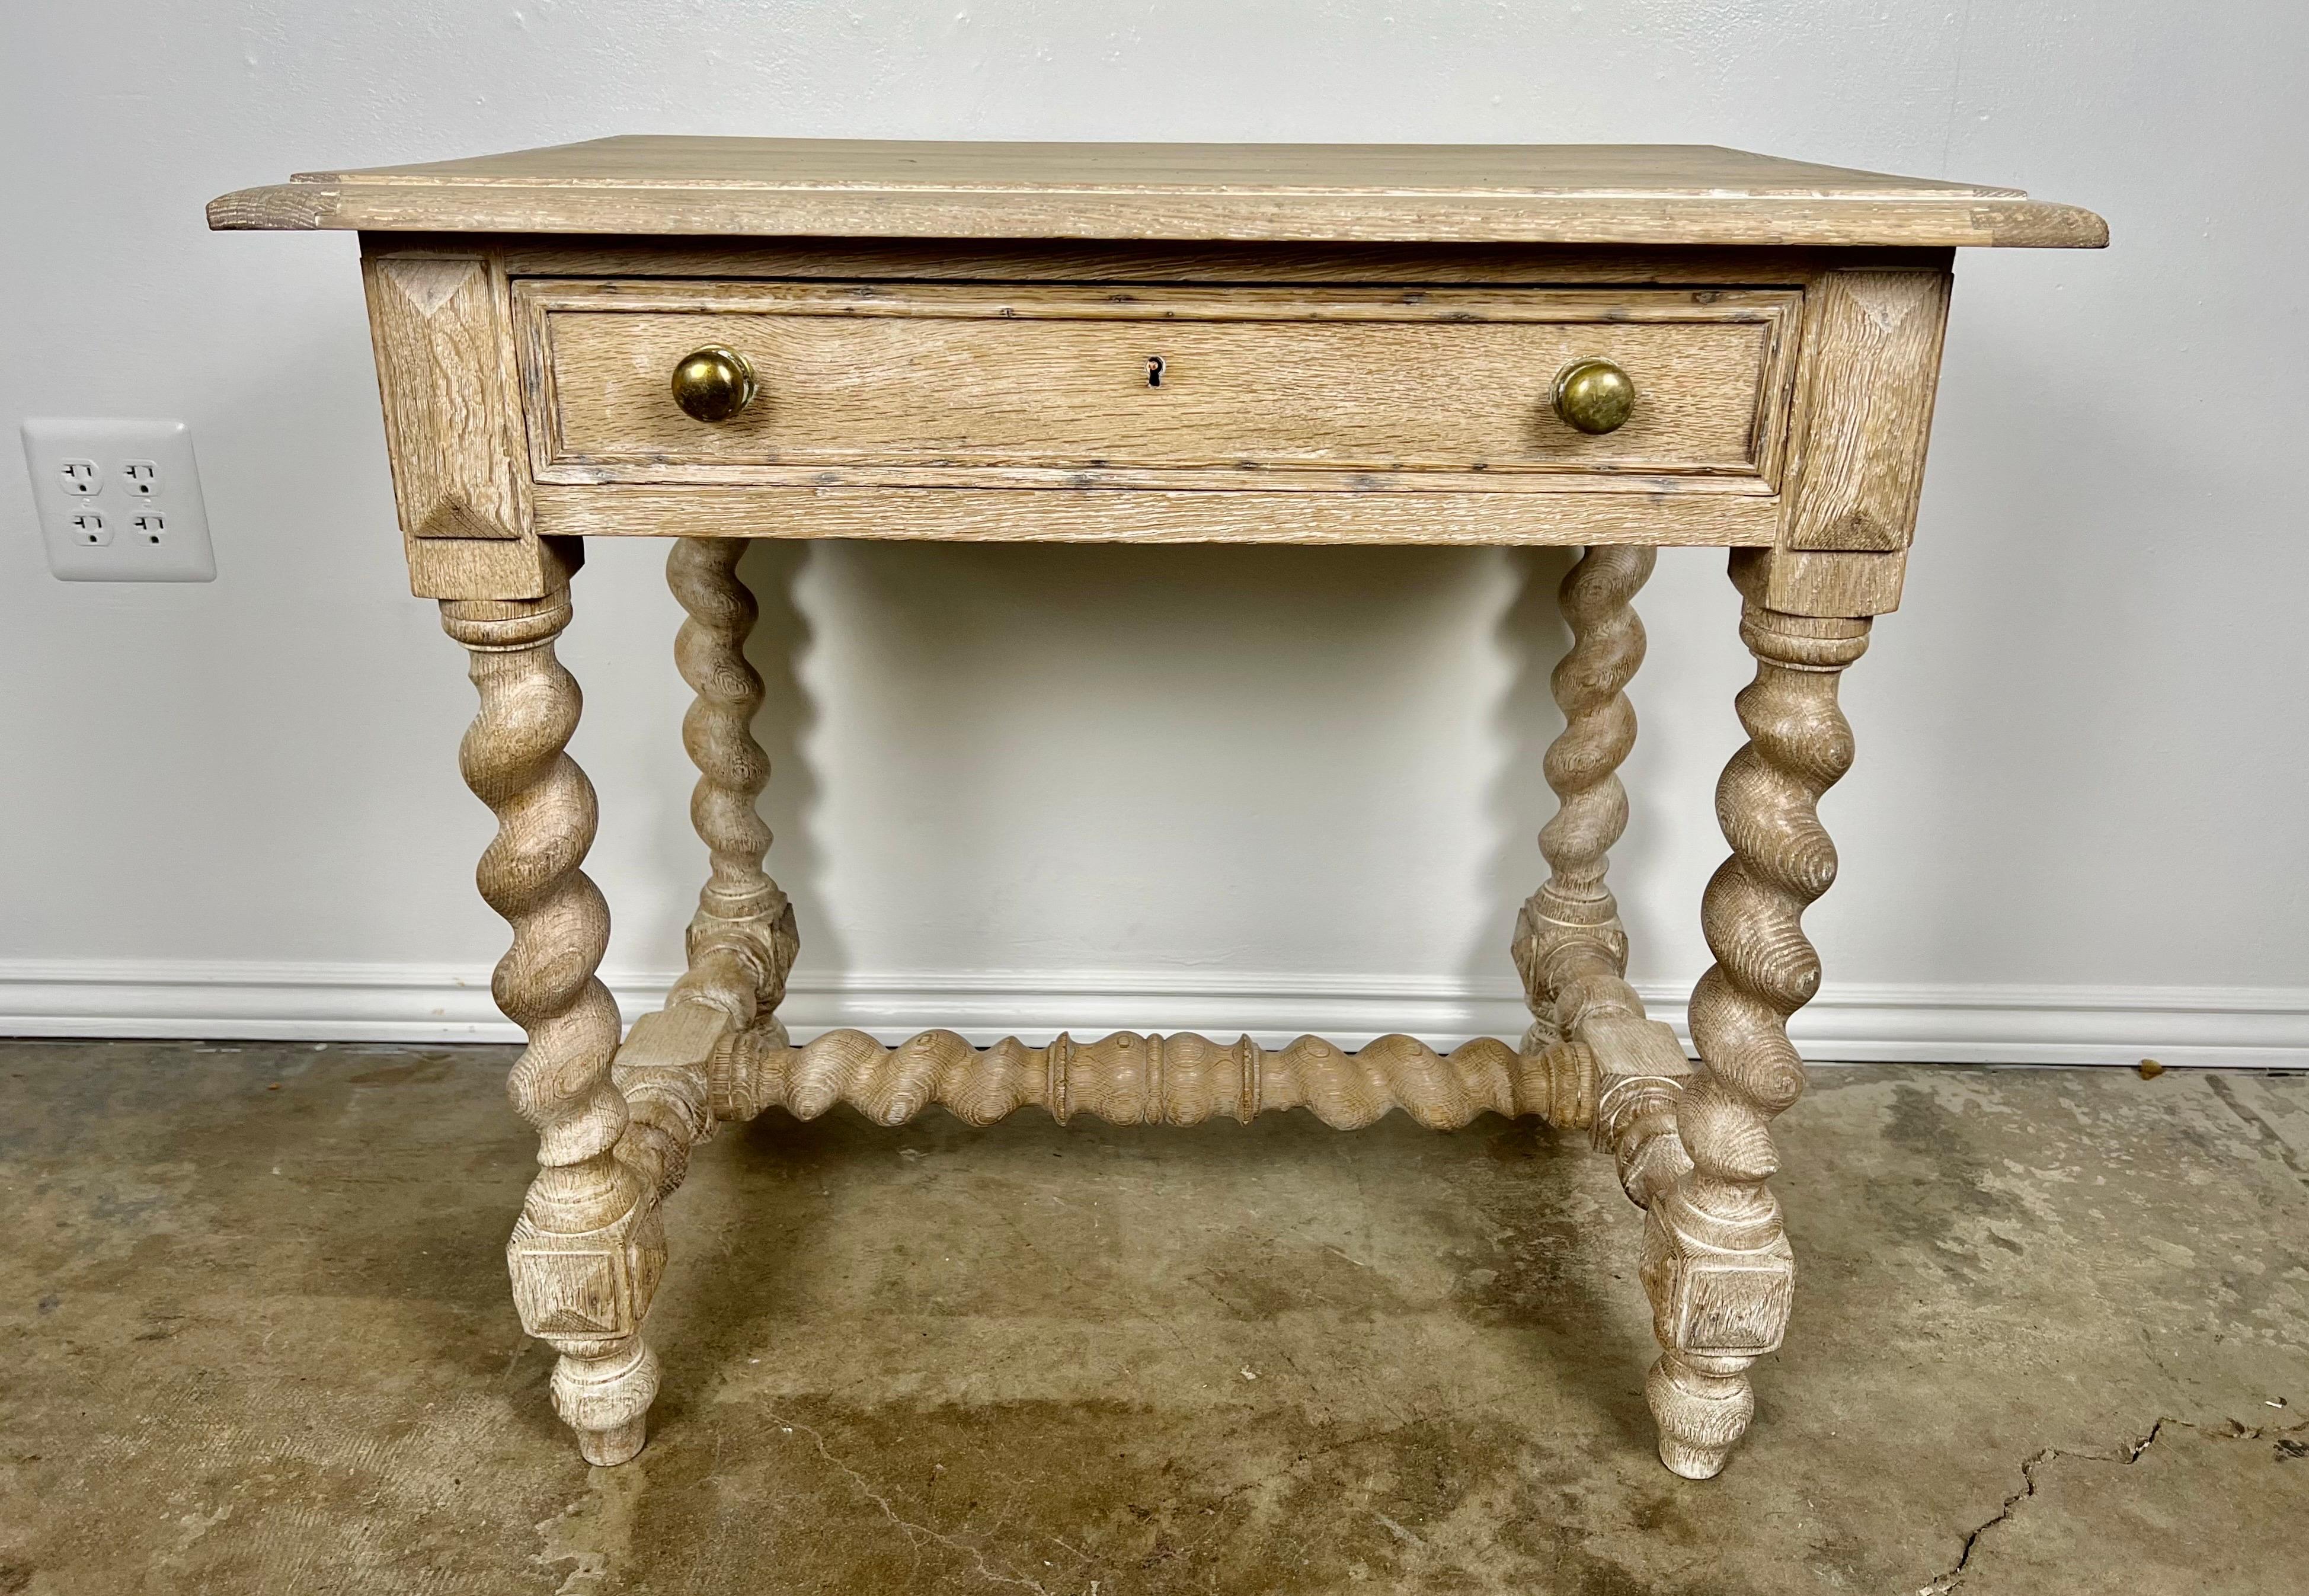 19th Century English Jacobean style table with a single drawer. The rectangular table stand on four barley twist legs connected by a center stretcher. The center drawer is decorated with two original brass knobs.